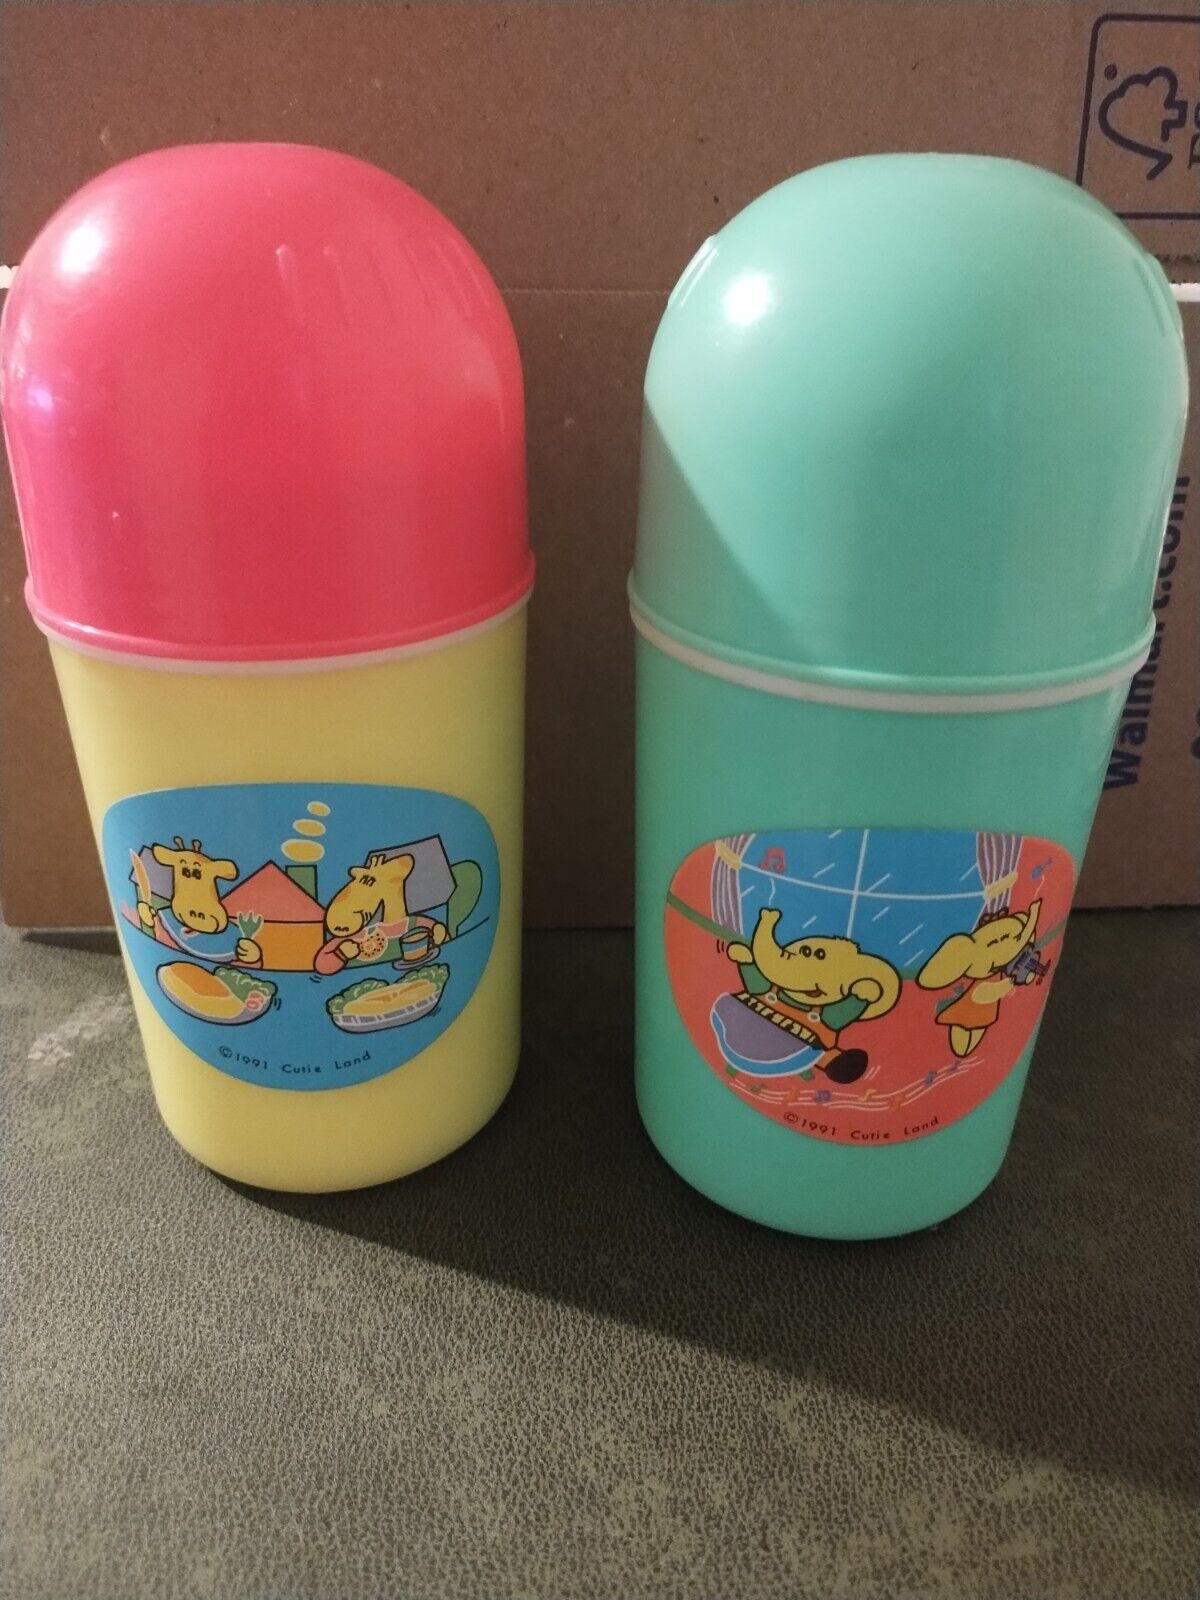 Lot of 2 Vintage 1991 Cutie Land Thermoses